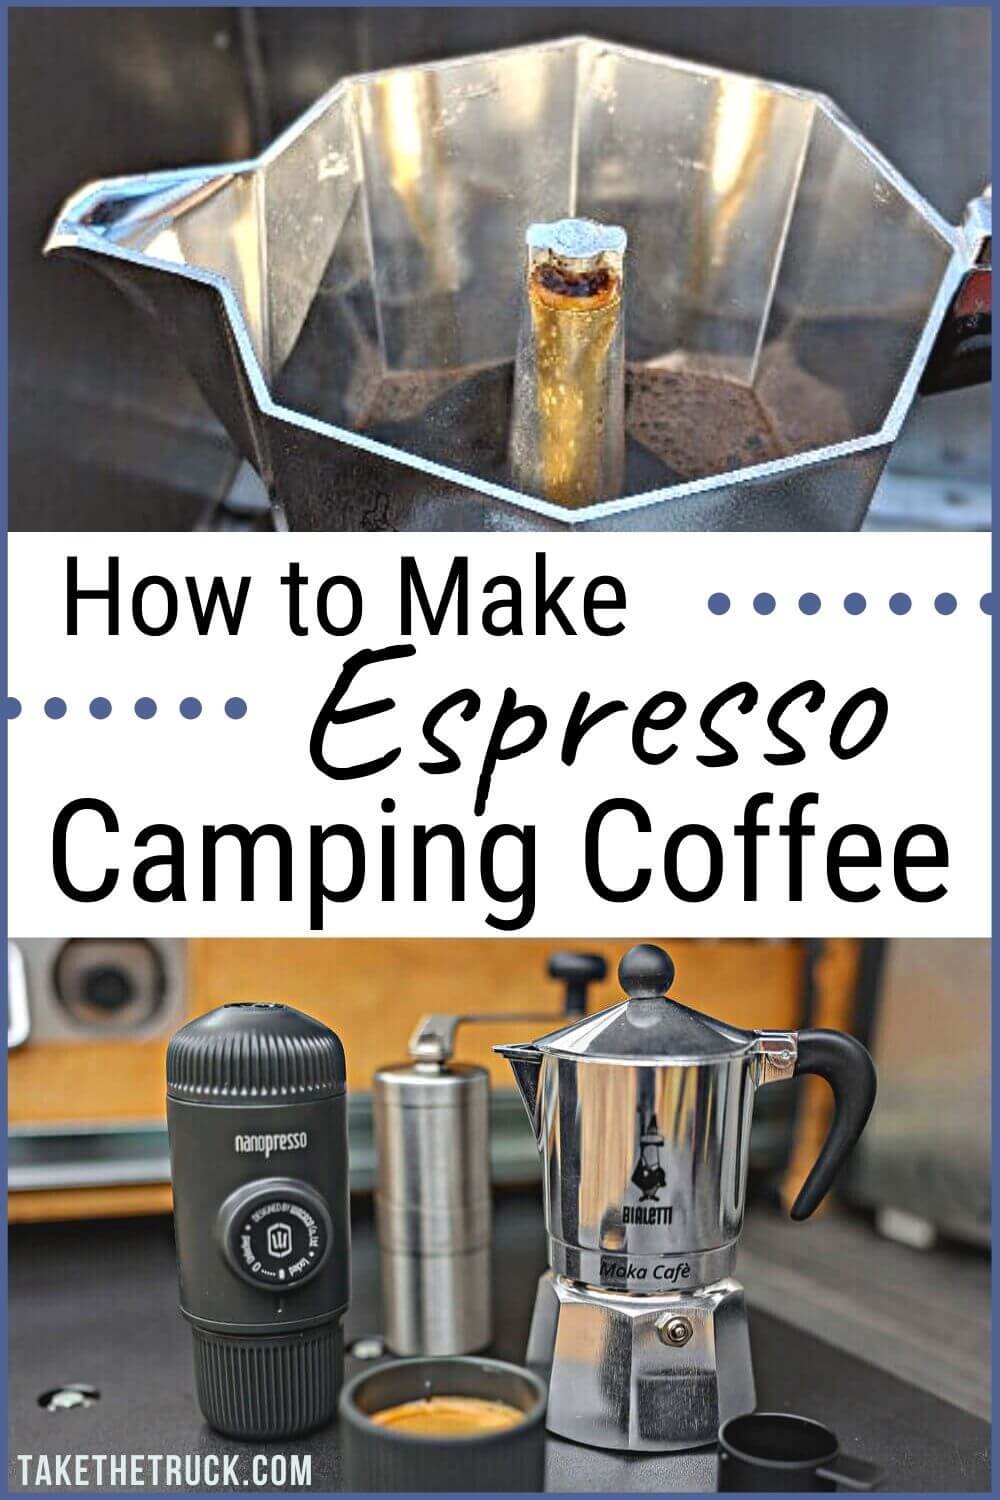 Camping espresso! Read this post for recommendations on camping espresso makers or espresso machines for camping, and learn how to use them to make camp espresso while camping!